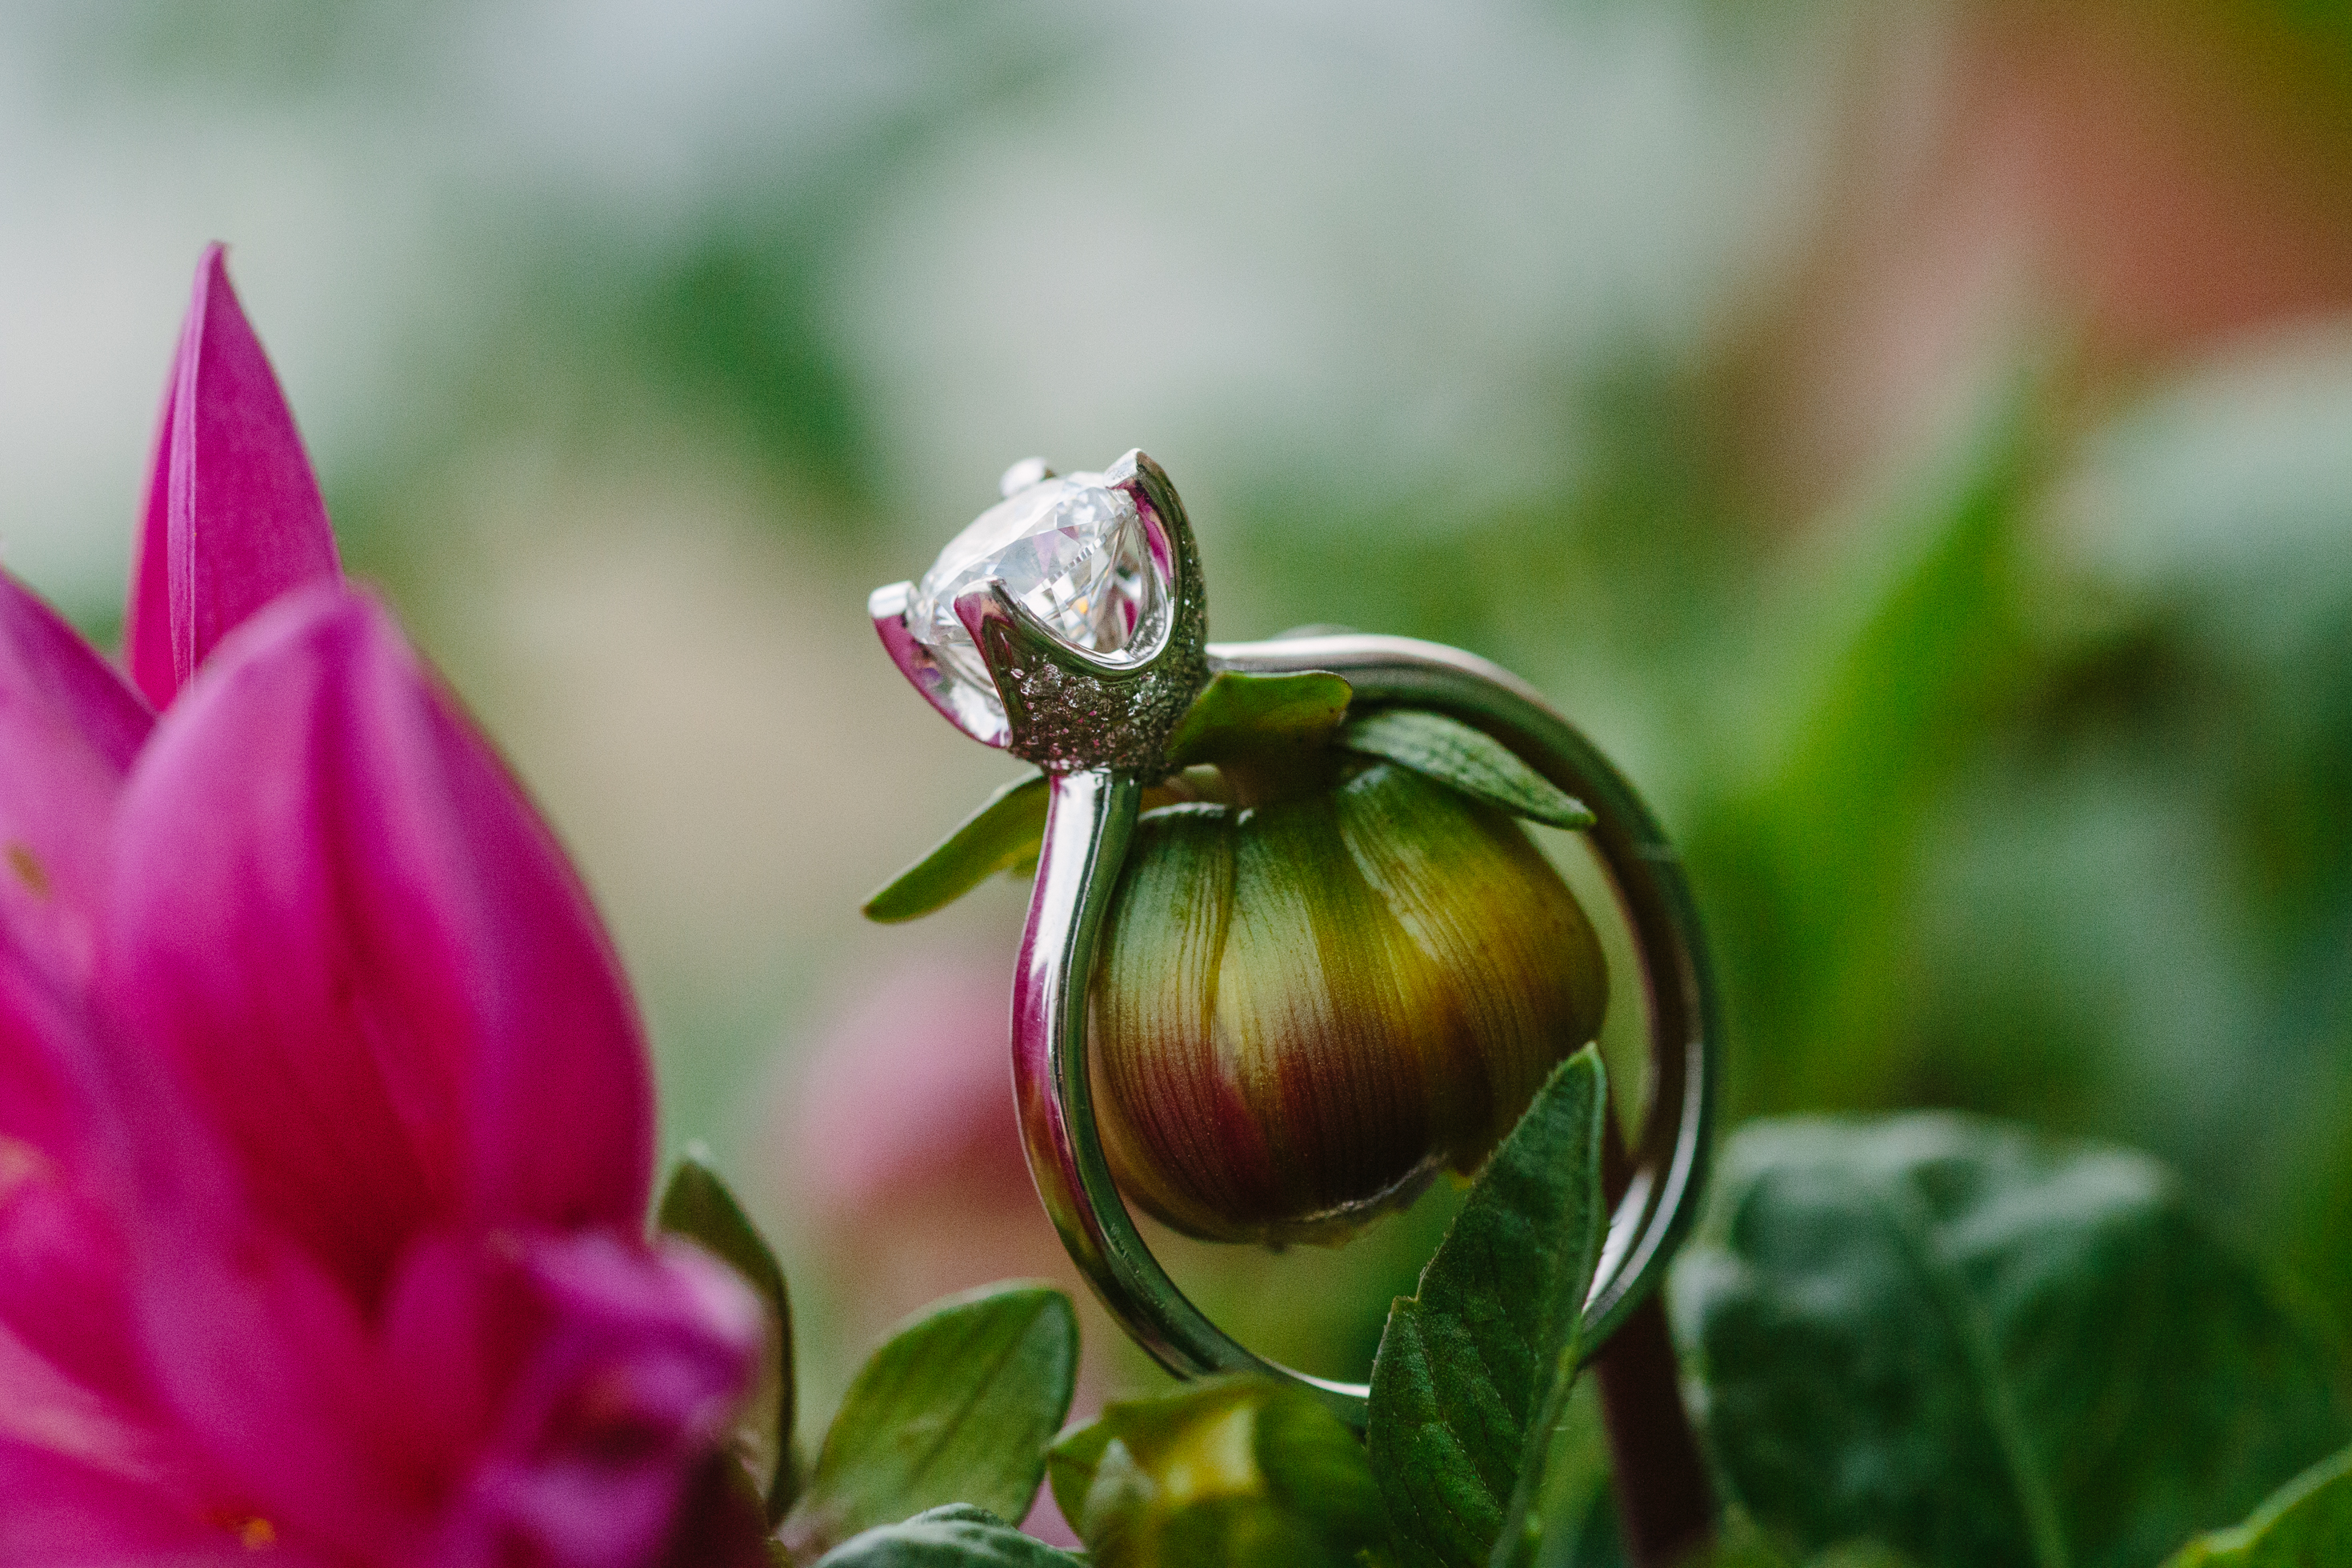 dubuque engagement session by catherine furlin photography, beautiful solitaire engagement ring on flower bud